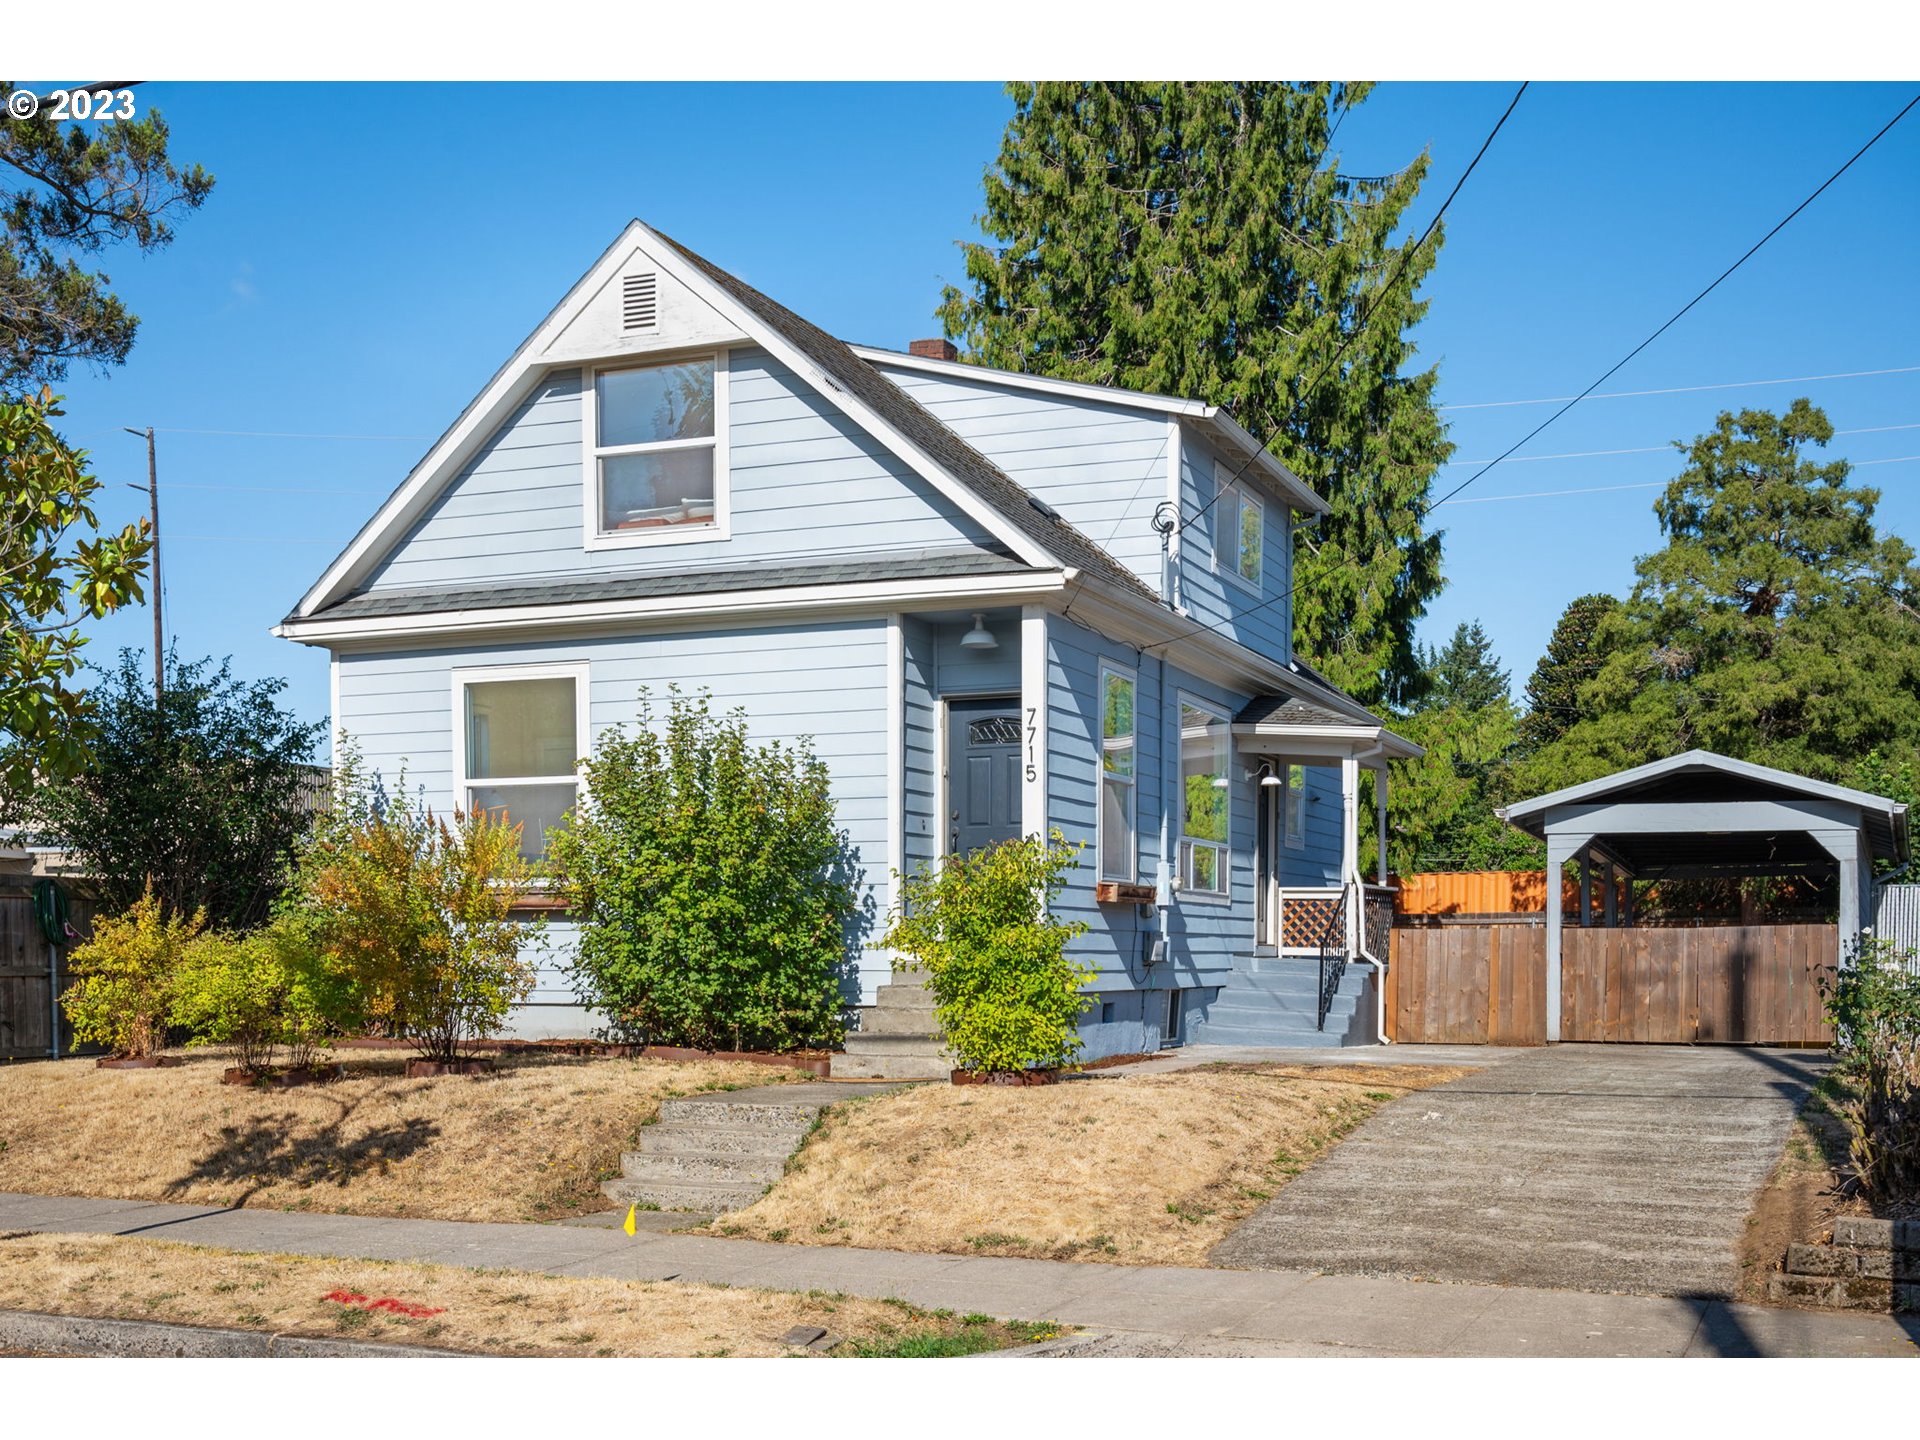 7715 N EXETER AVE, Portland, OR 97203